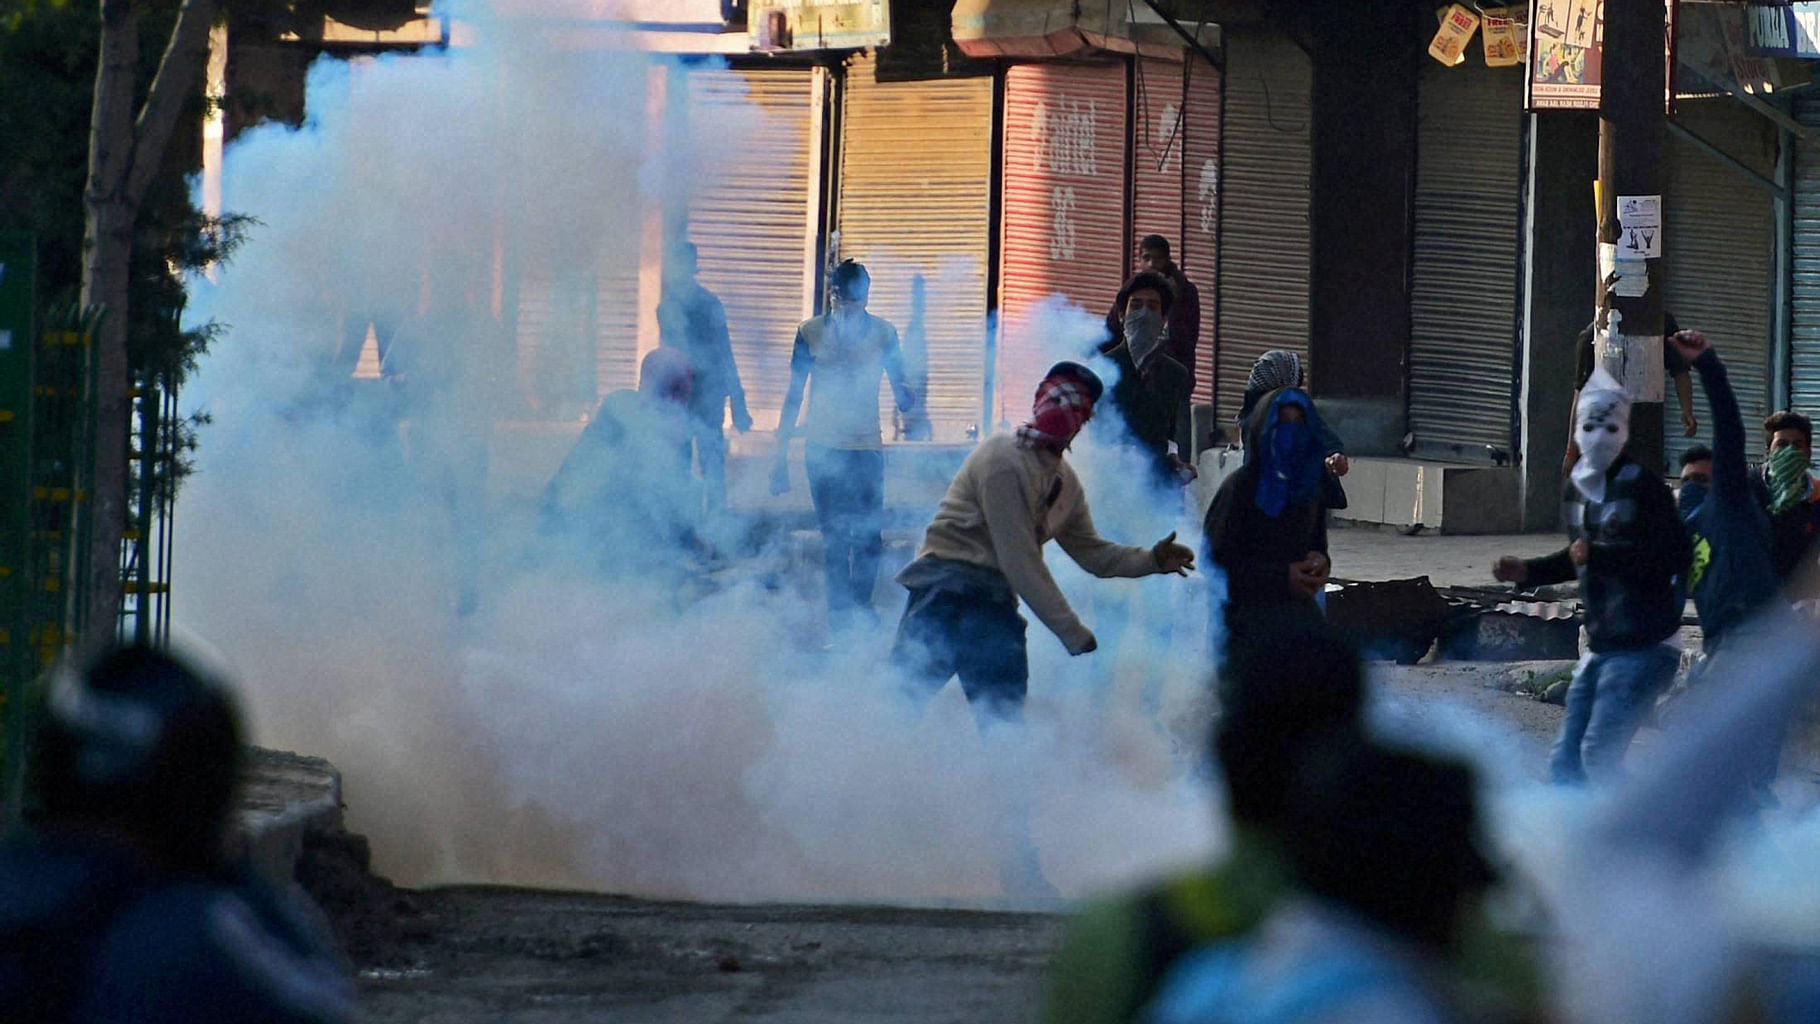 

Trouble began in Handwara, Kashmir on Tuesday when there was a clash between the army and Kashmiri locals. (Photo: PTI)